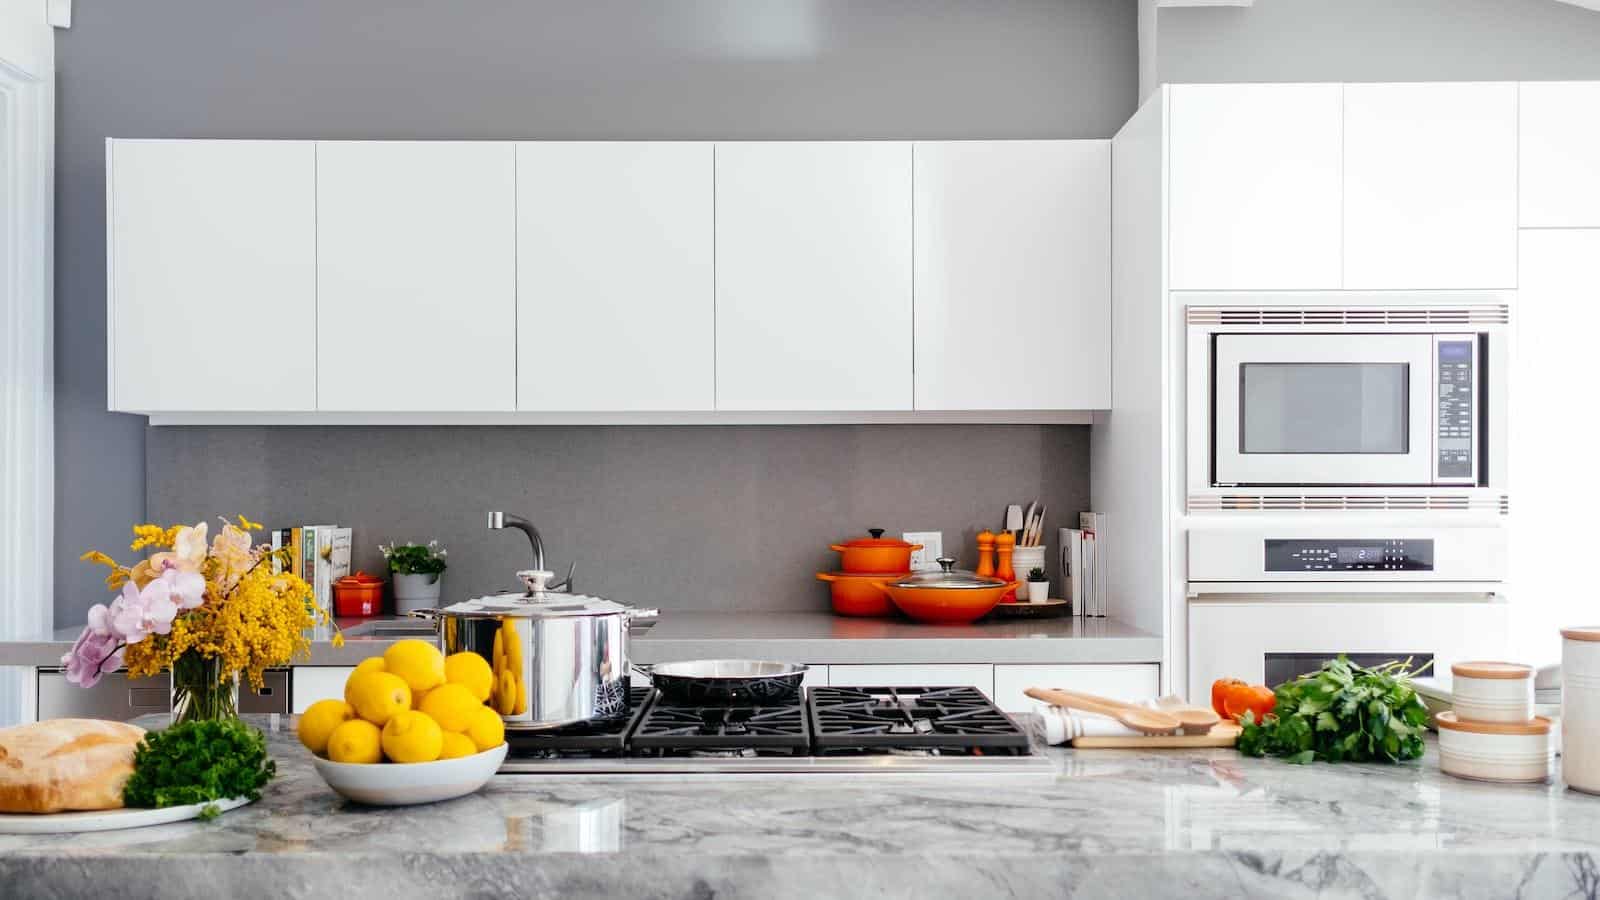 Revamp Your Palm Beach Oasis: Contemporary Kitchen Cabinets Set the Scene